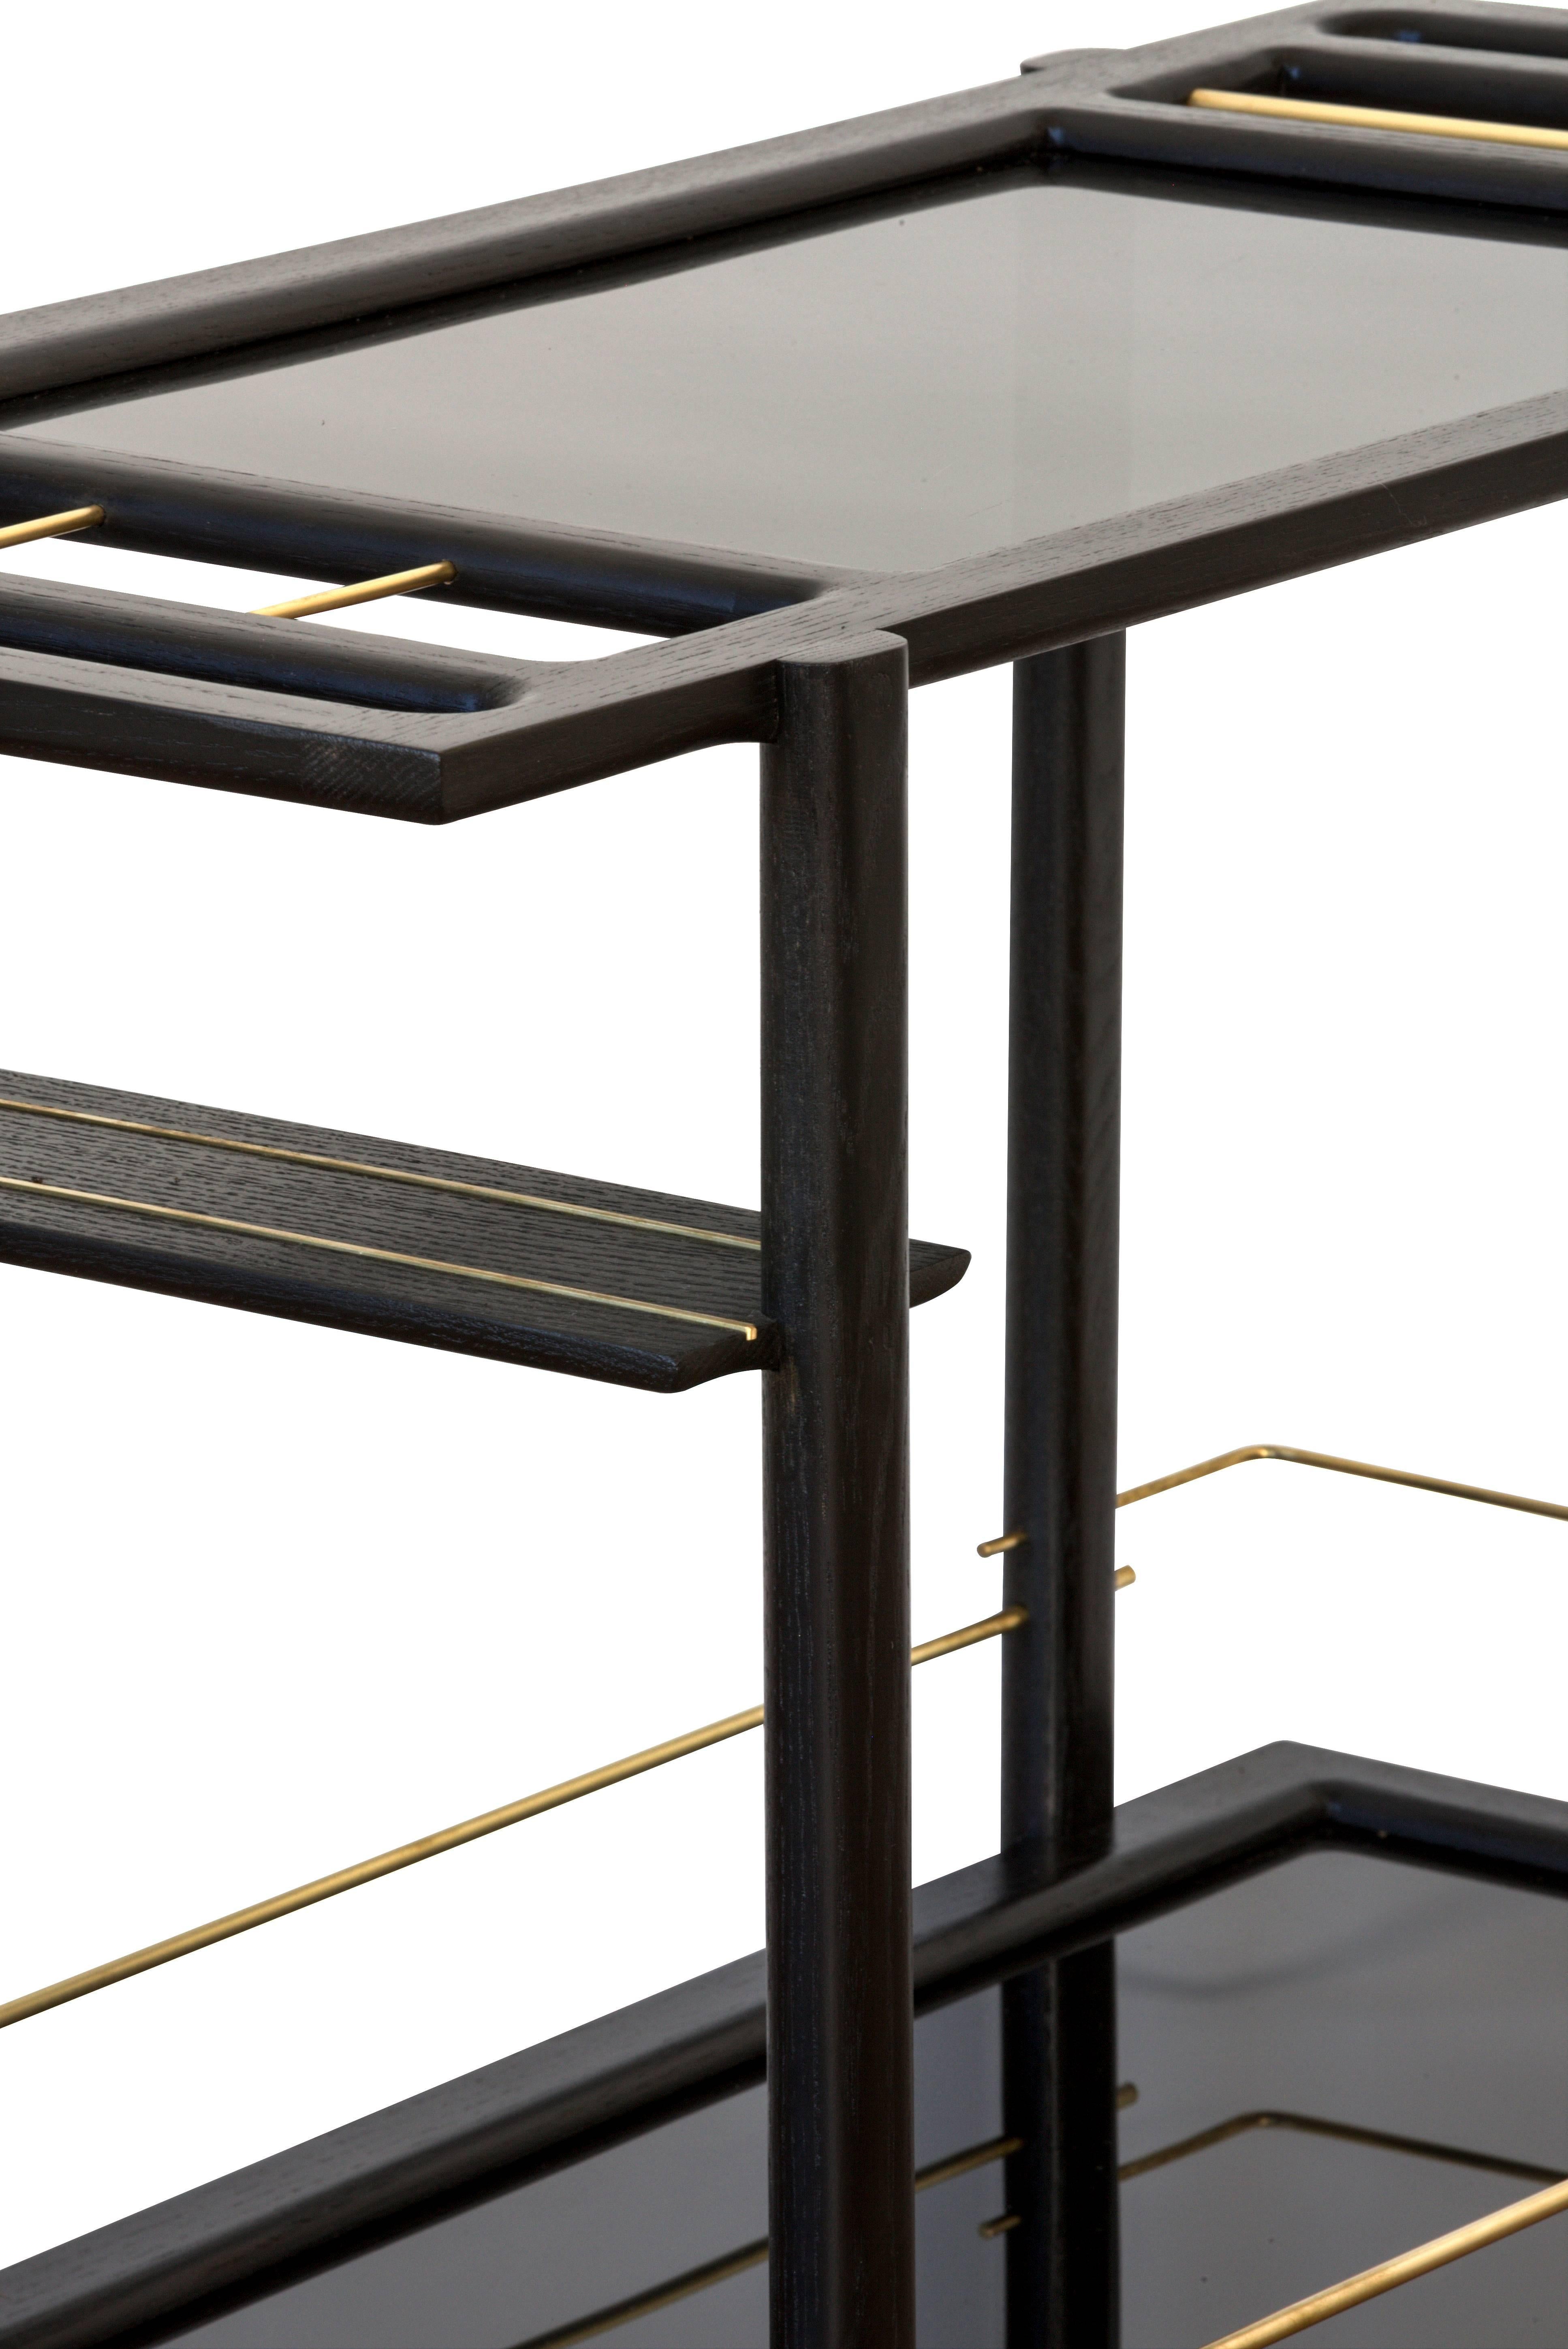 Solid wood constructed barcart with hand-cut joinery, tempered glass panels, and fine metal accents. Handmade in Los Angeles, California. 

Shown in ebonized oak, brass with smoked glass. 

Wood type is available in ebonized oak, white oak,